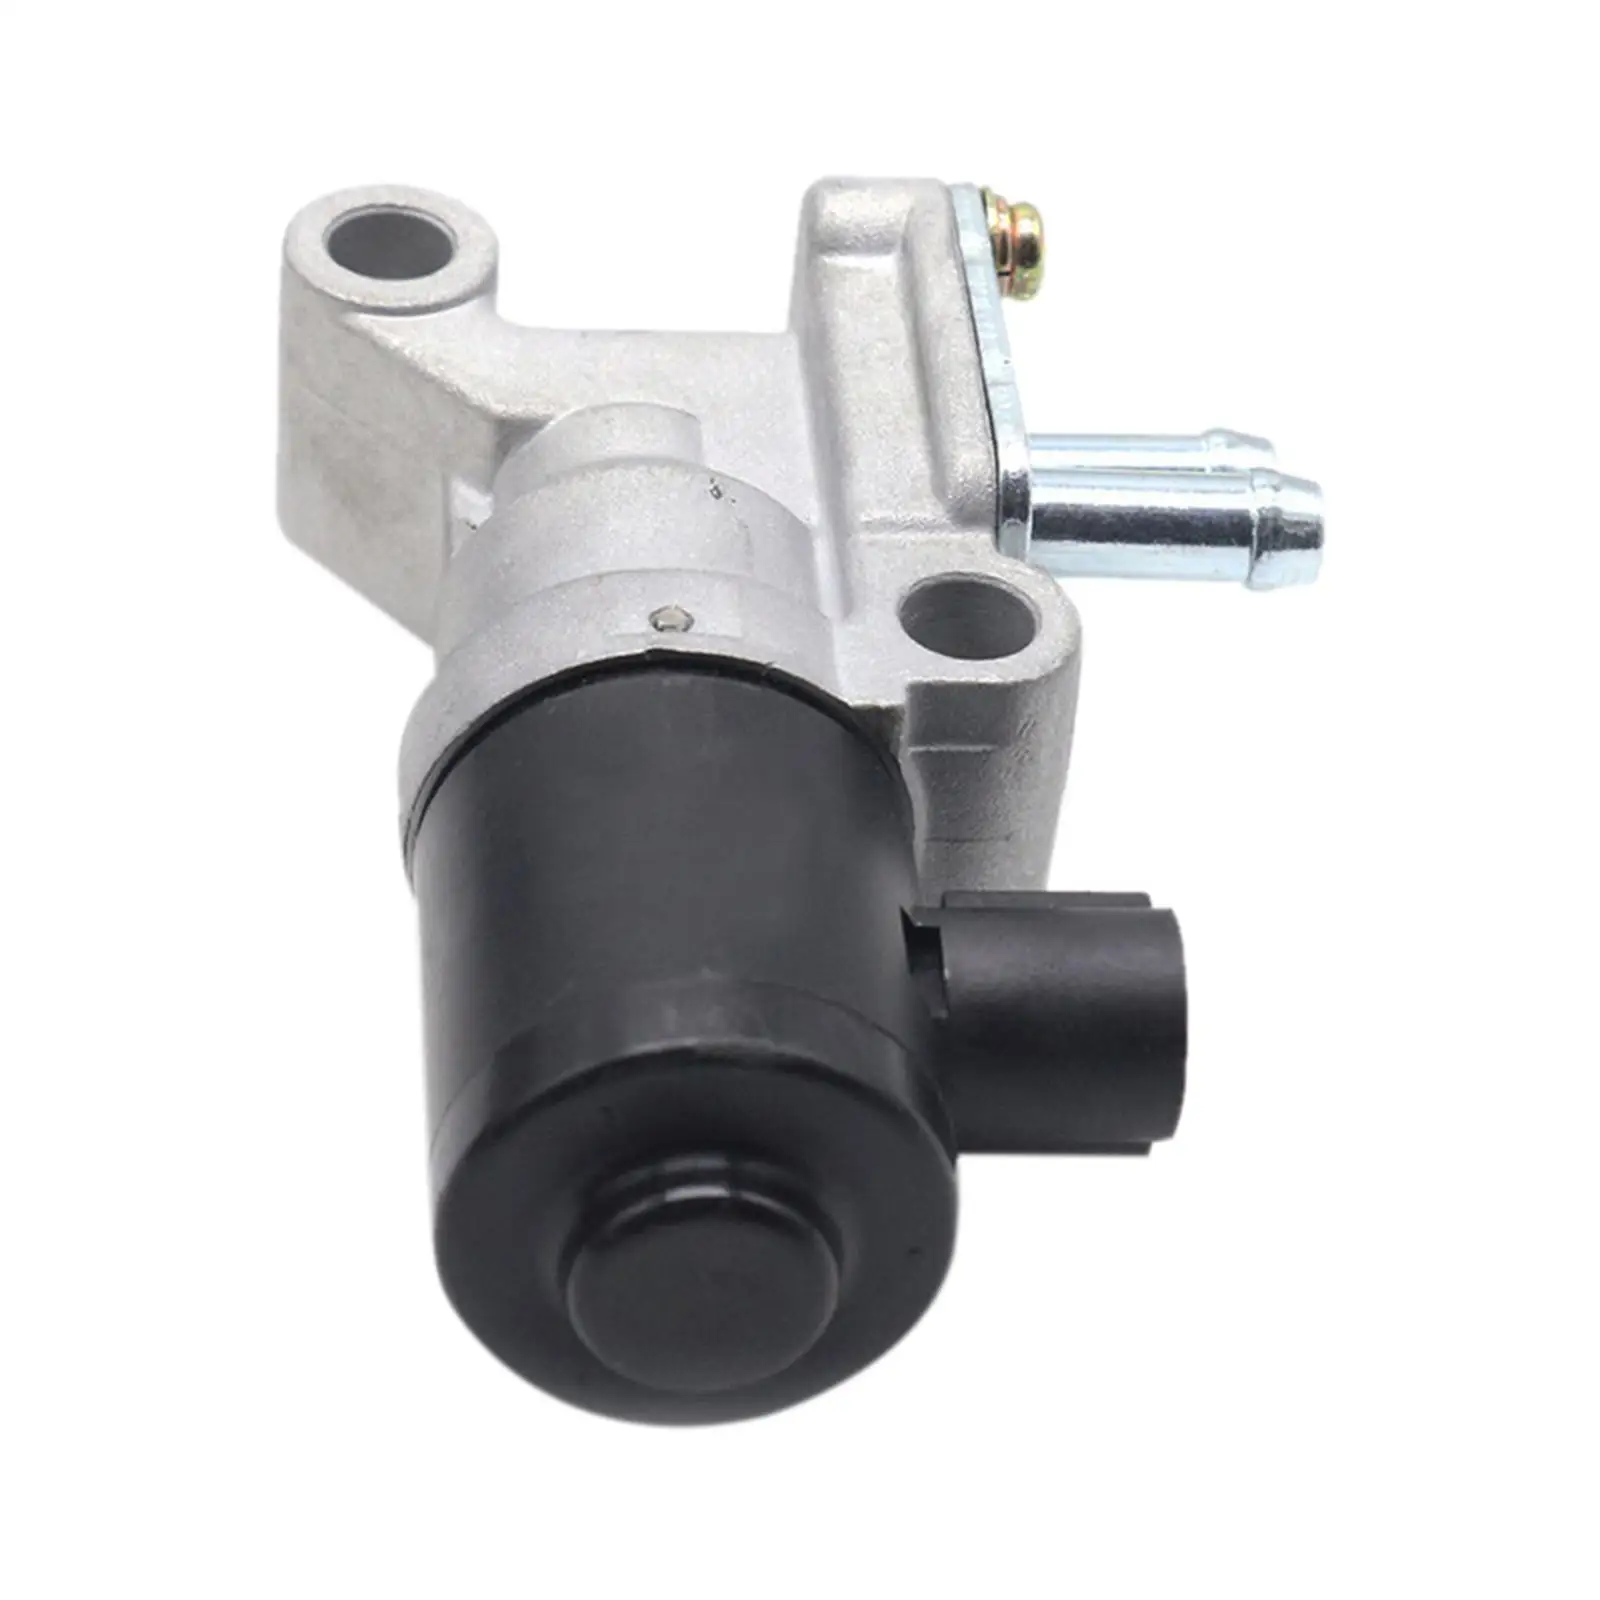 New Idle  Valve 36450--J01 36450J01 Compatible with    1996-2000, adjustment screws thread-locked to remain 